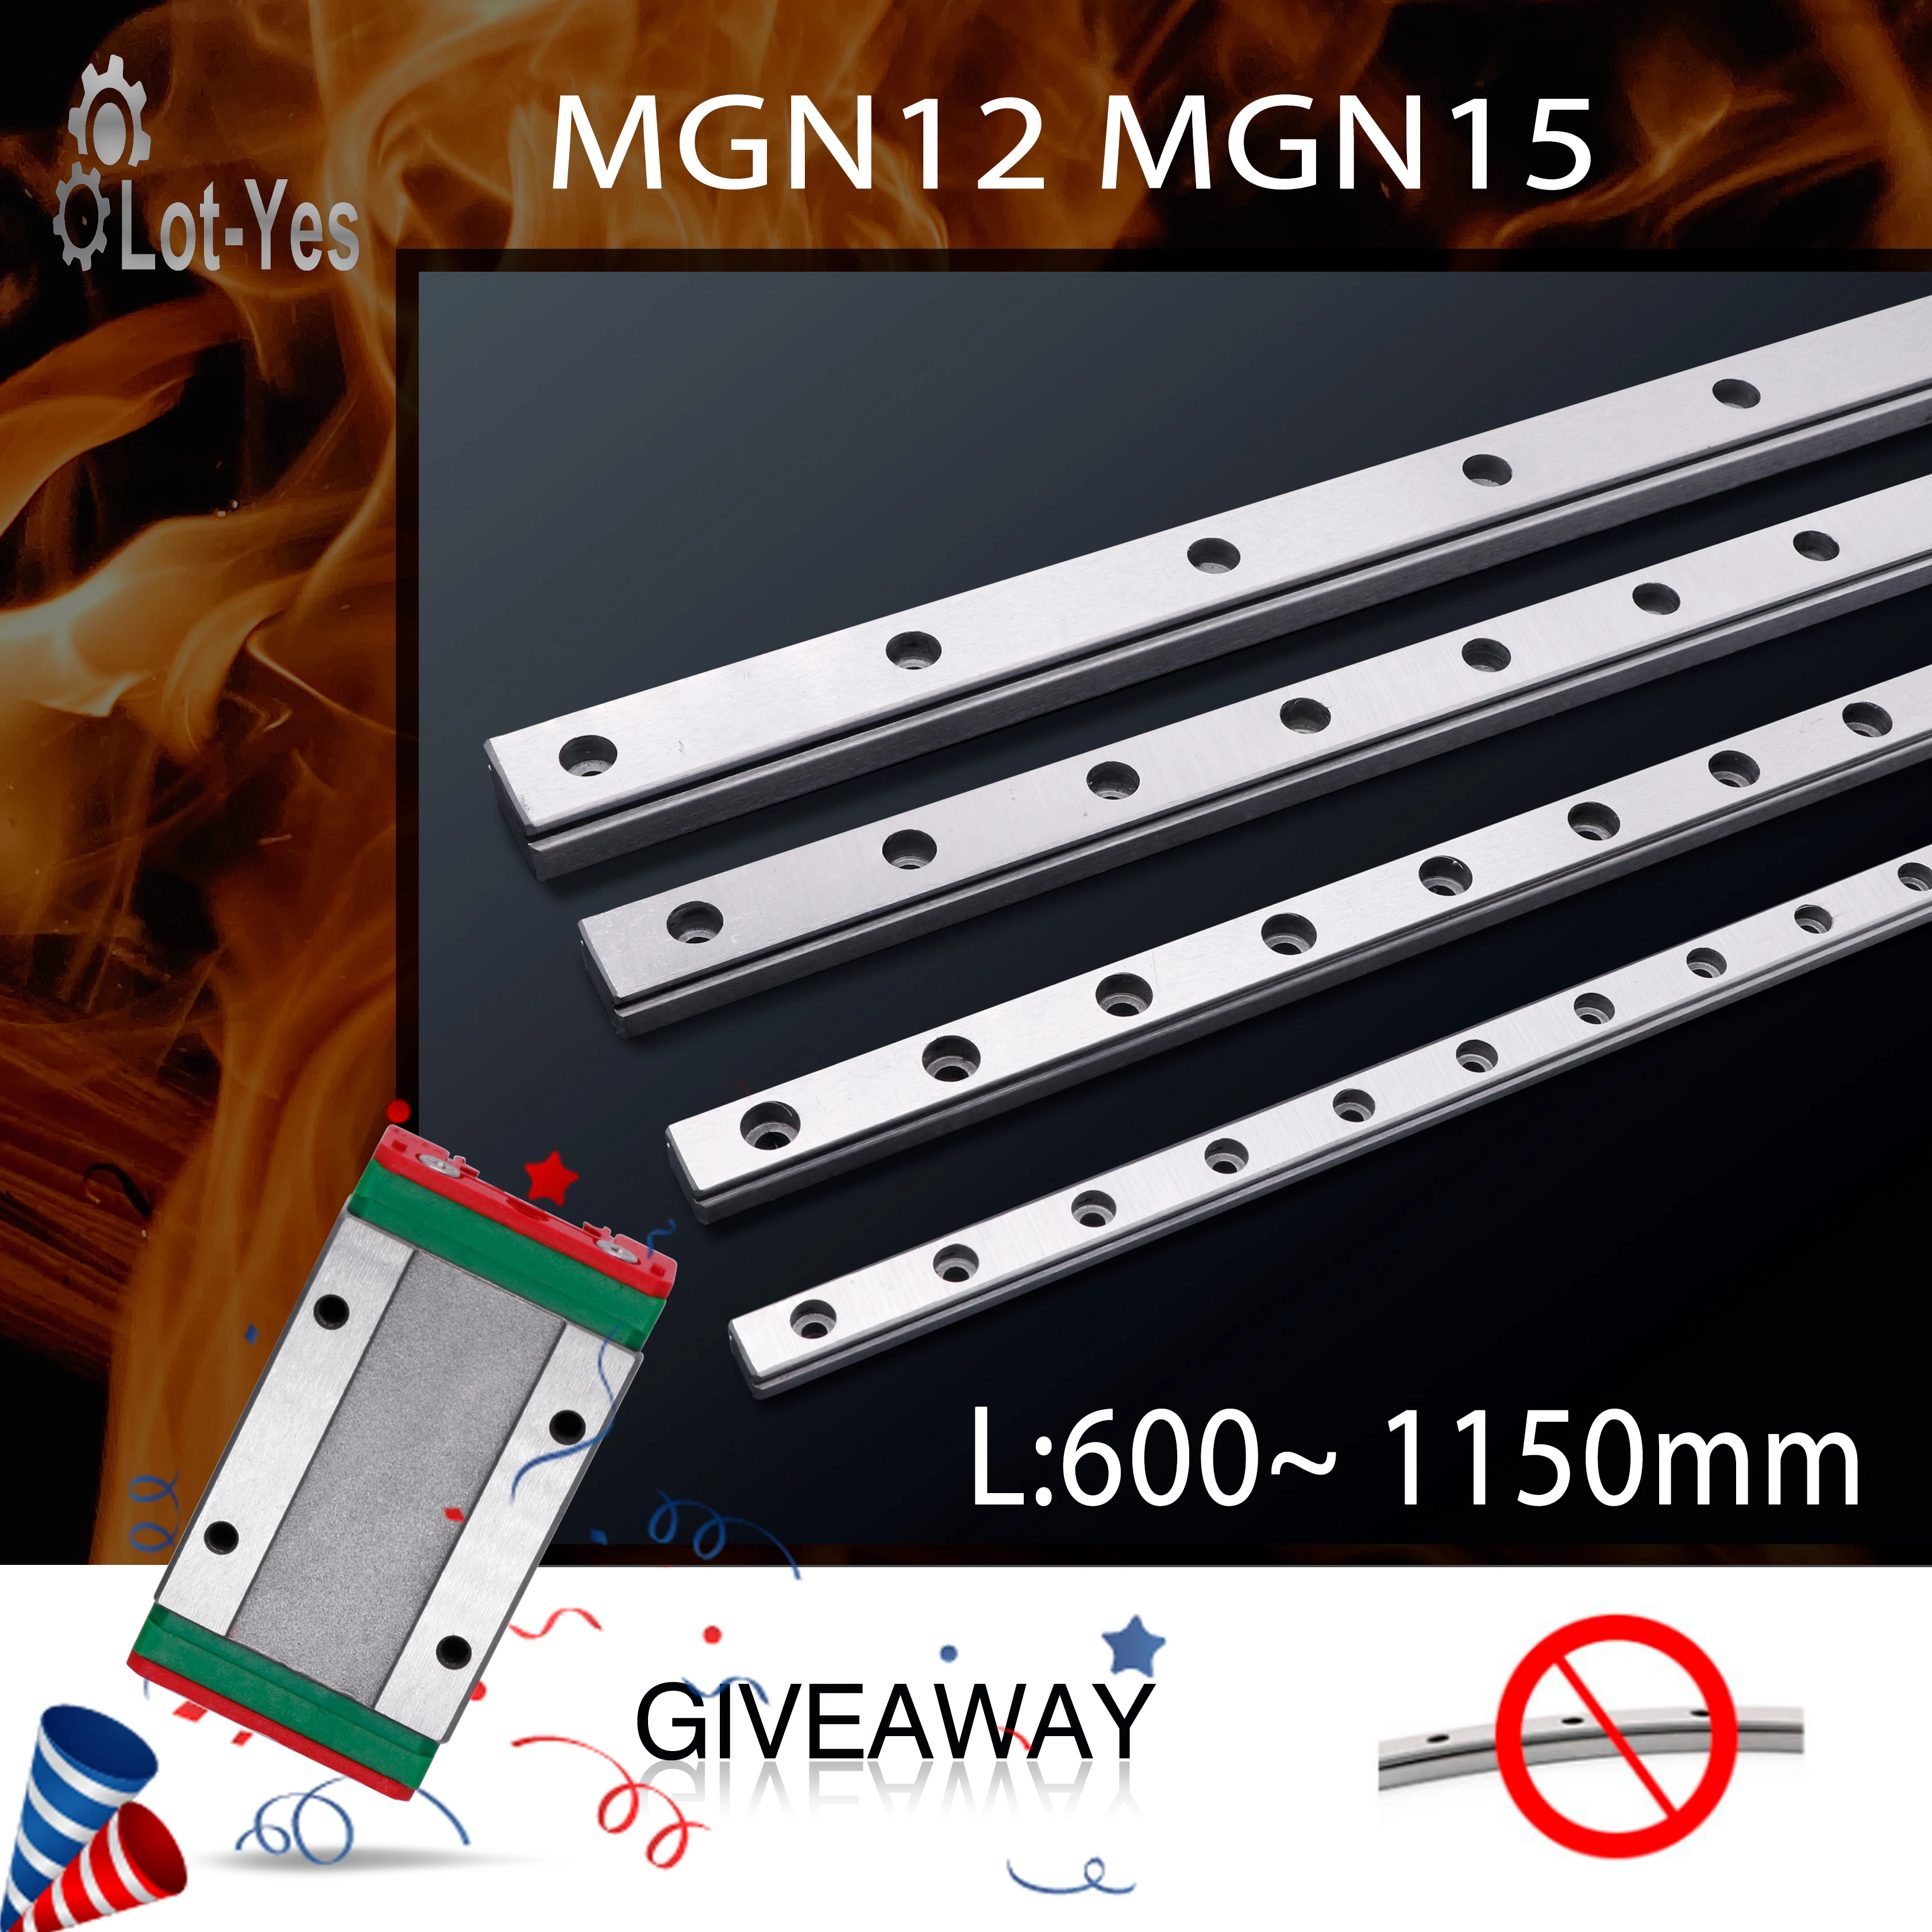 

MGN12 MGN15 MGN12C MGN15H 600 - 1150 MM Slide Rail Guide 1PC MGN 12 Miniature Linear Guide Rail +Free 1PC MGN12H Square Carriage